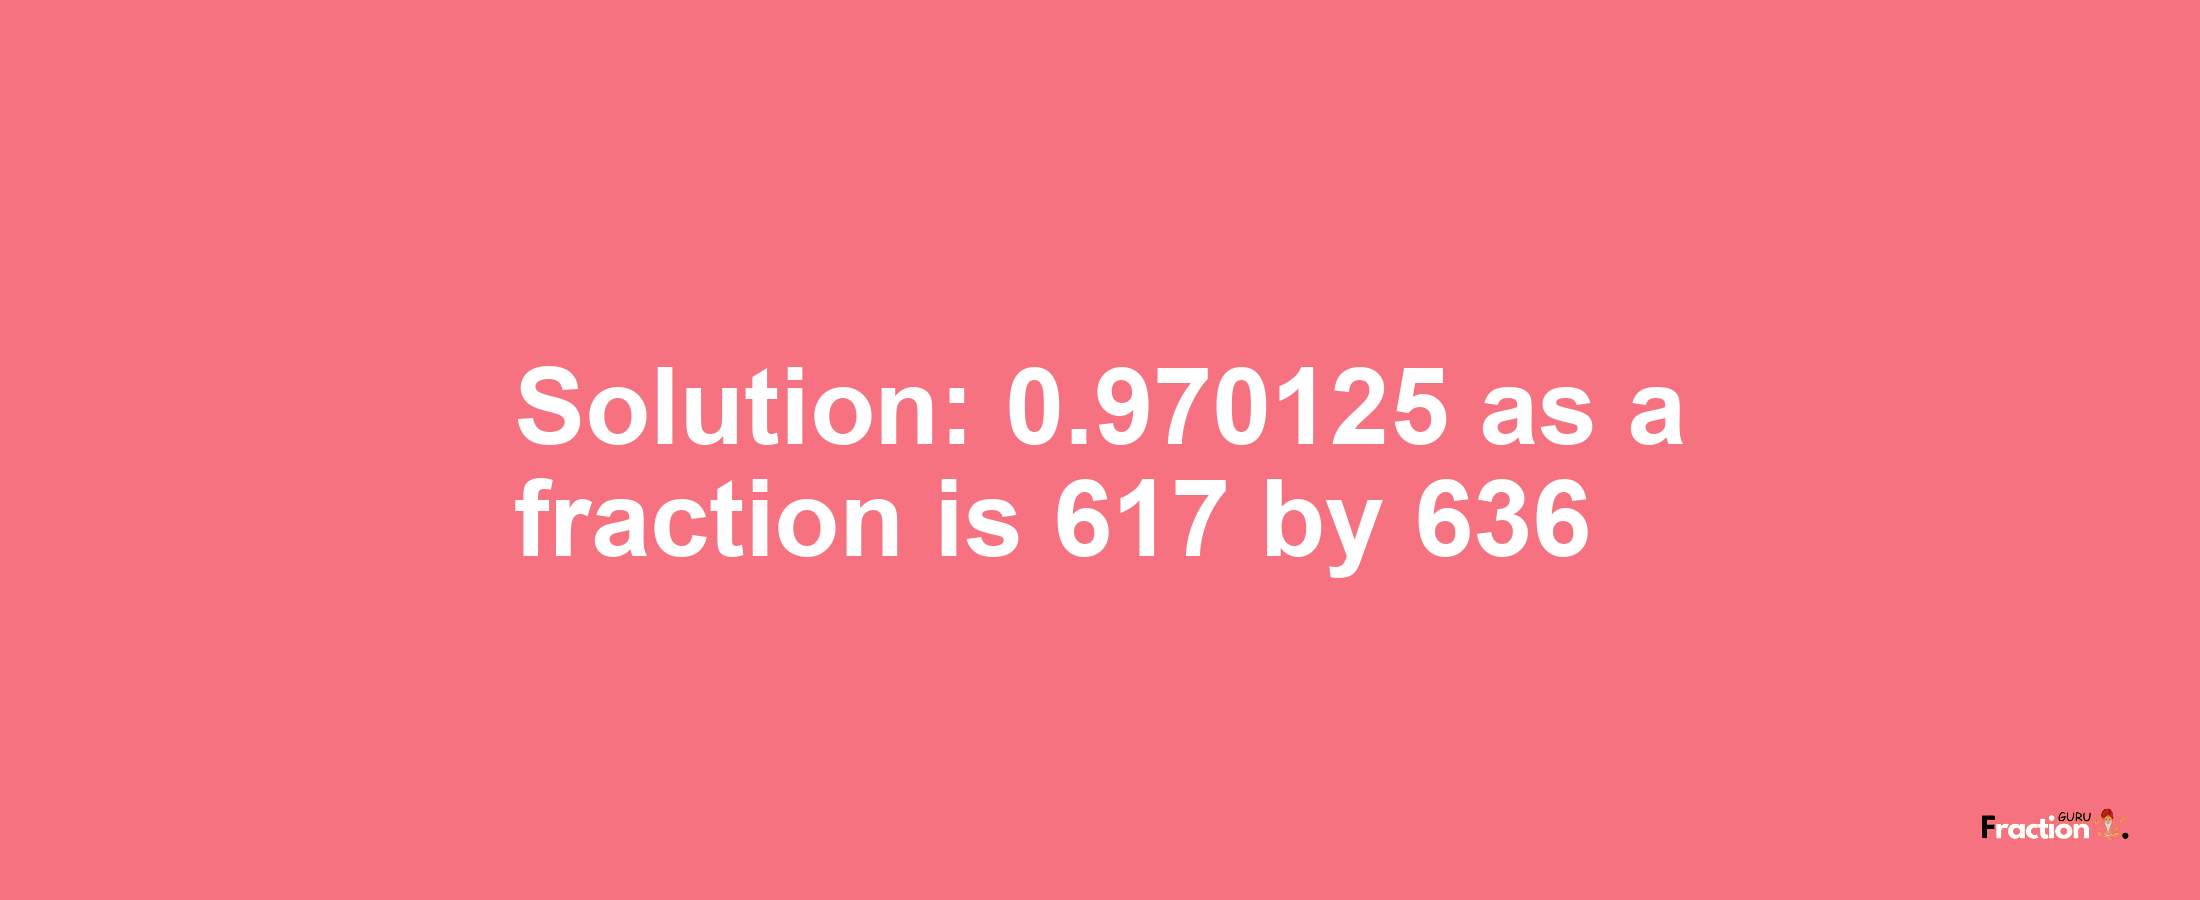 Solution:0.970125 as a fraction is 617/636